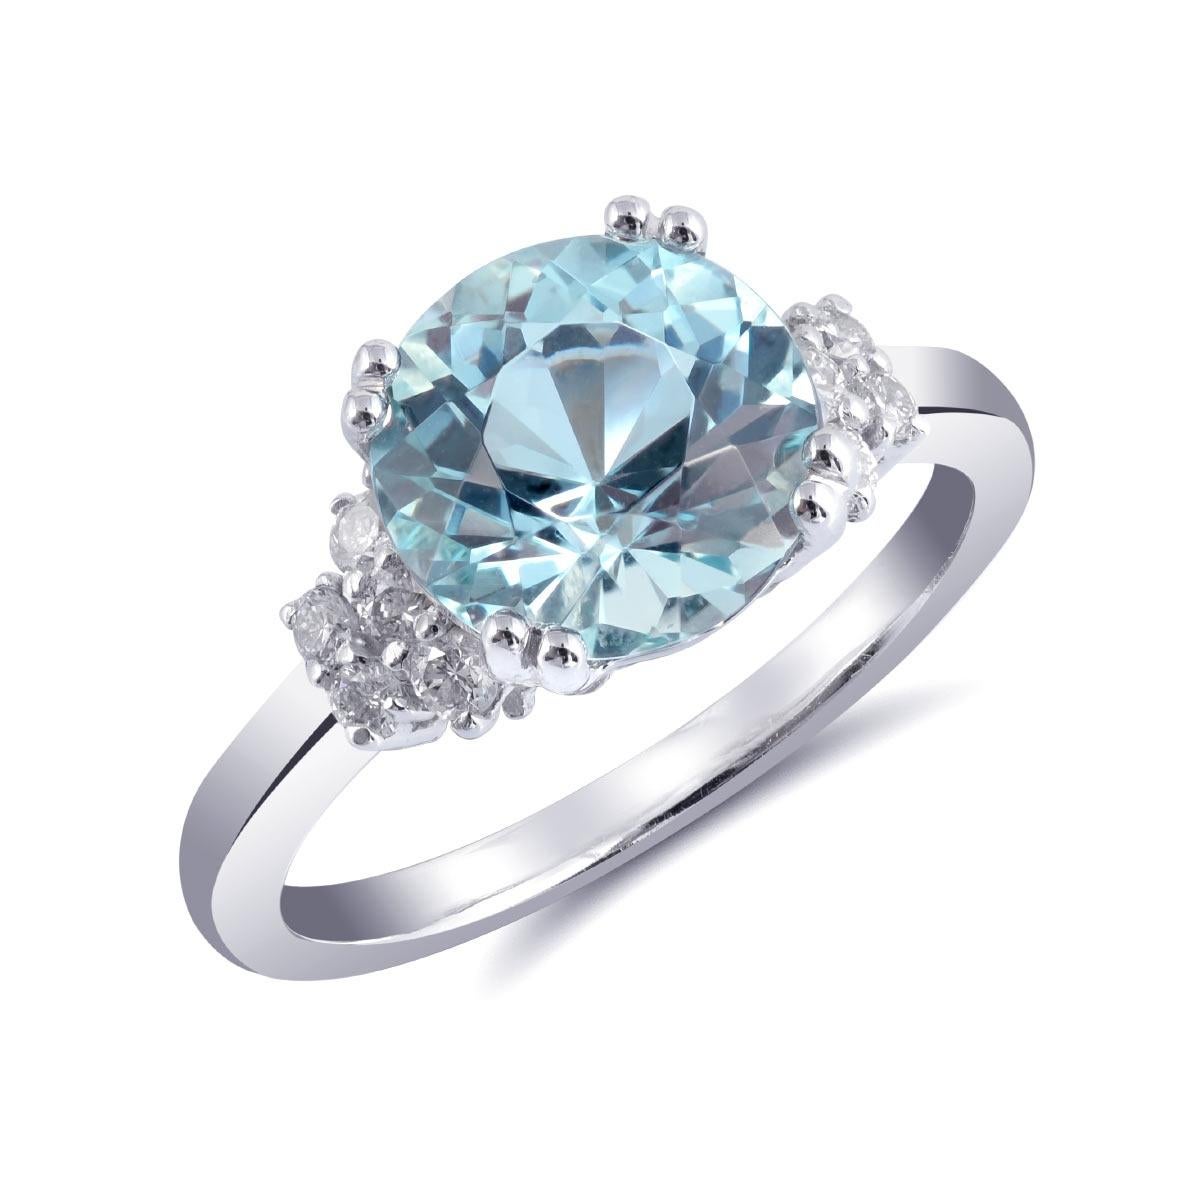 2.40 carats Natural Aquamarine Diamonds set in 14K White Gold Ring  In New Condition For Sale In Los Angeles, CA